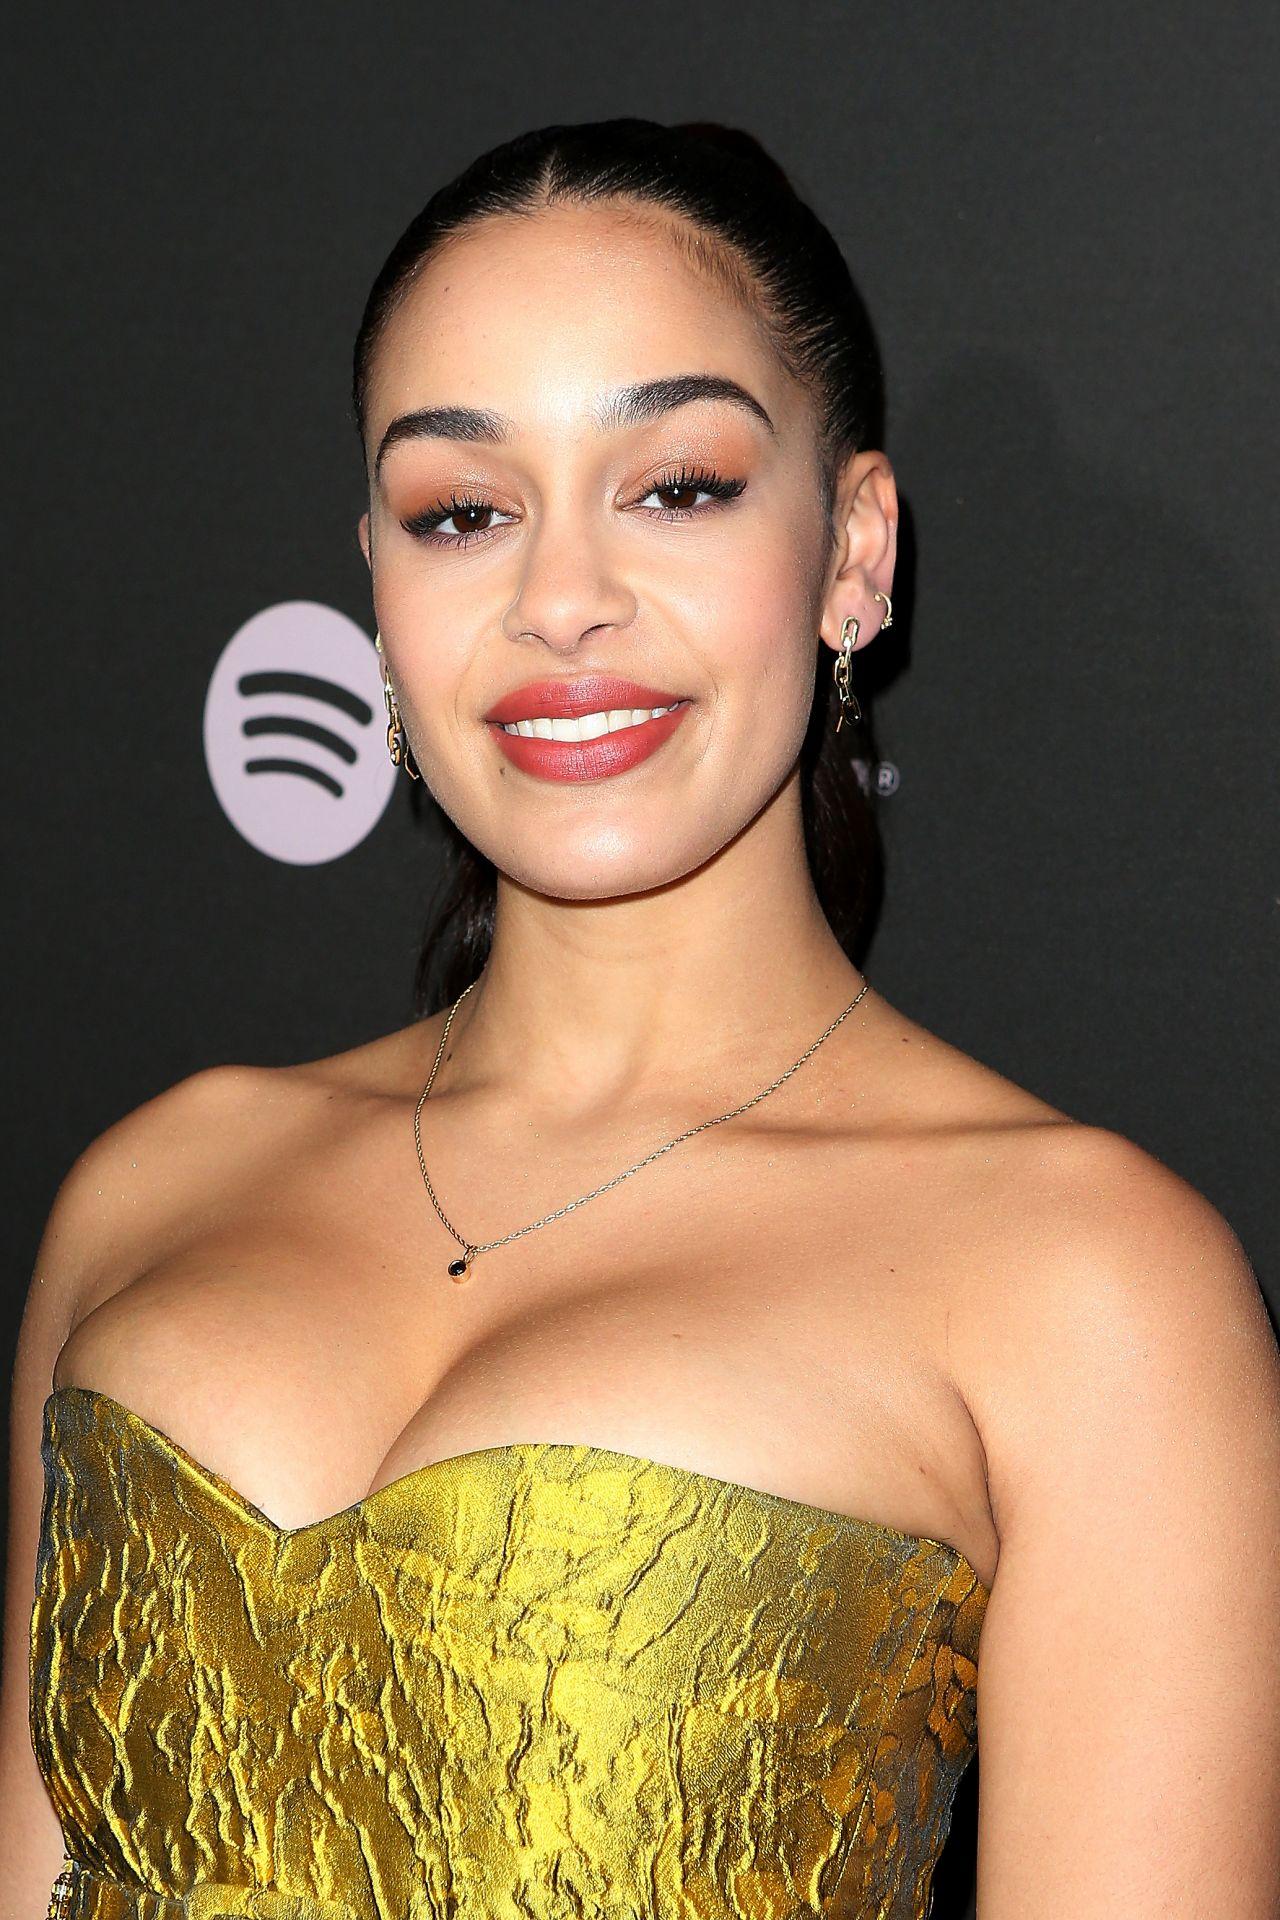 70+ Hot Pictures Of Jorja Smith Which Will Make Your Day 17